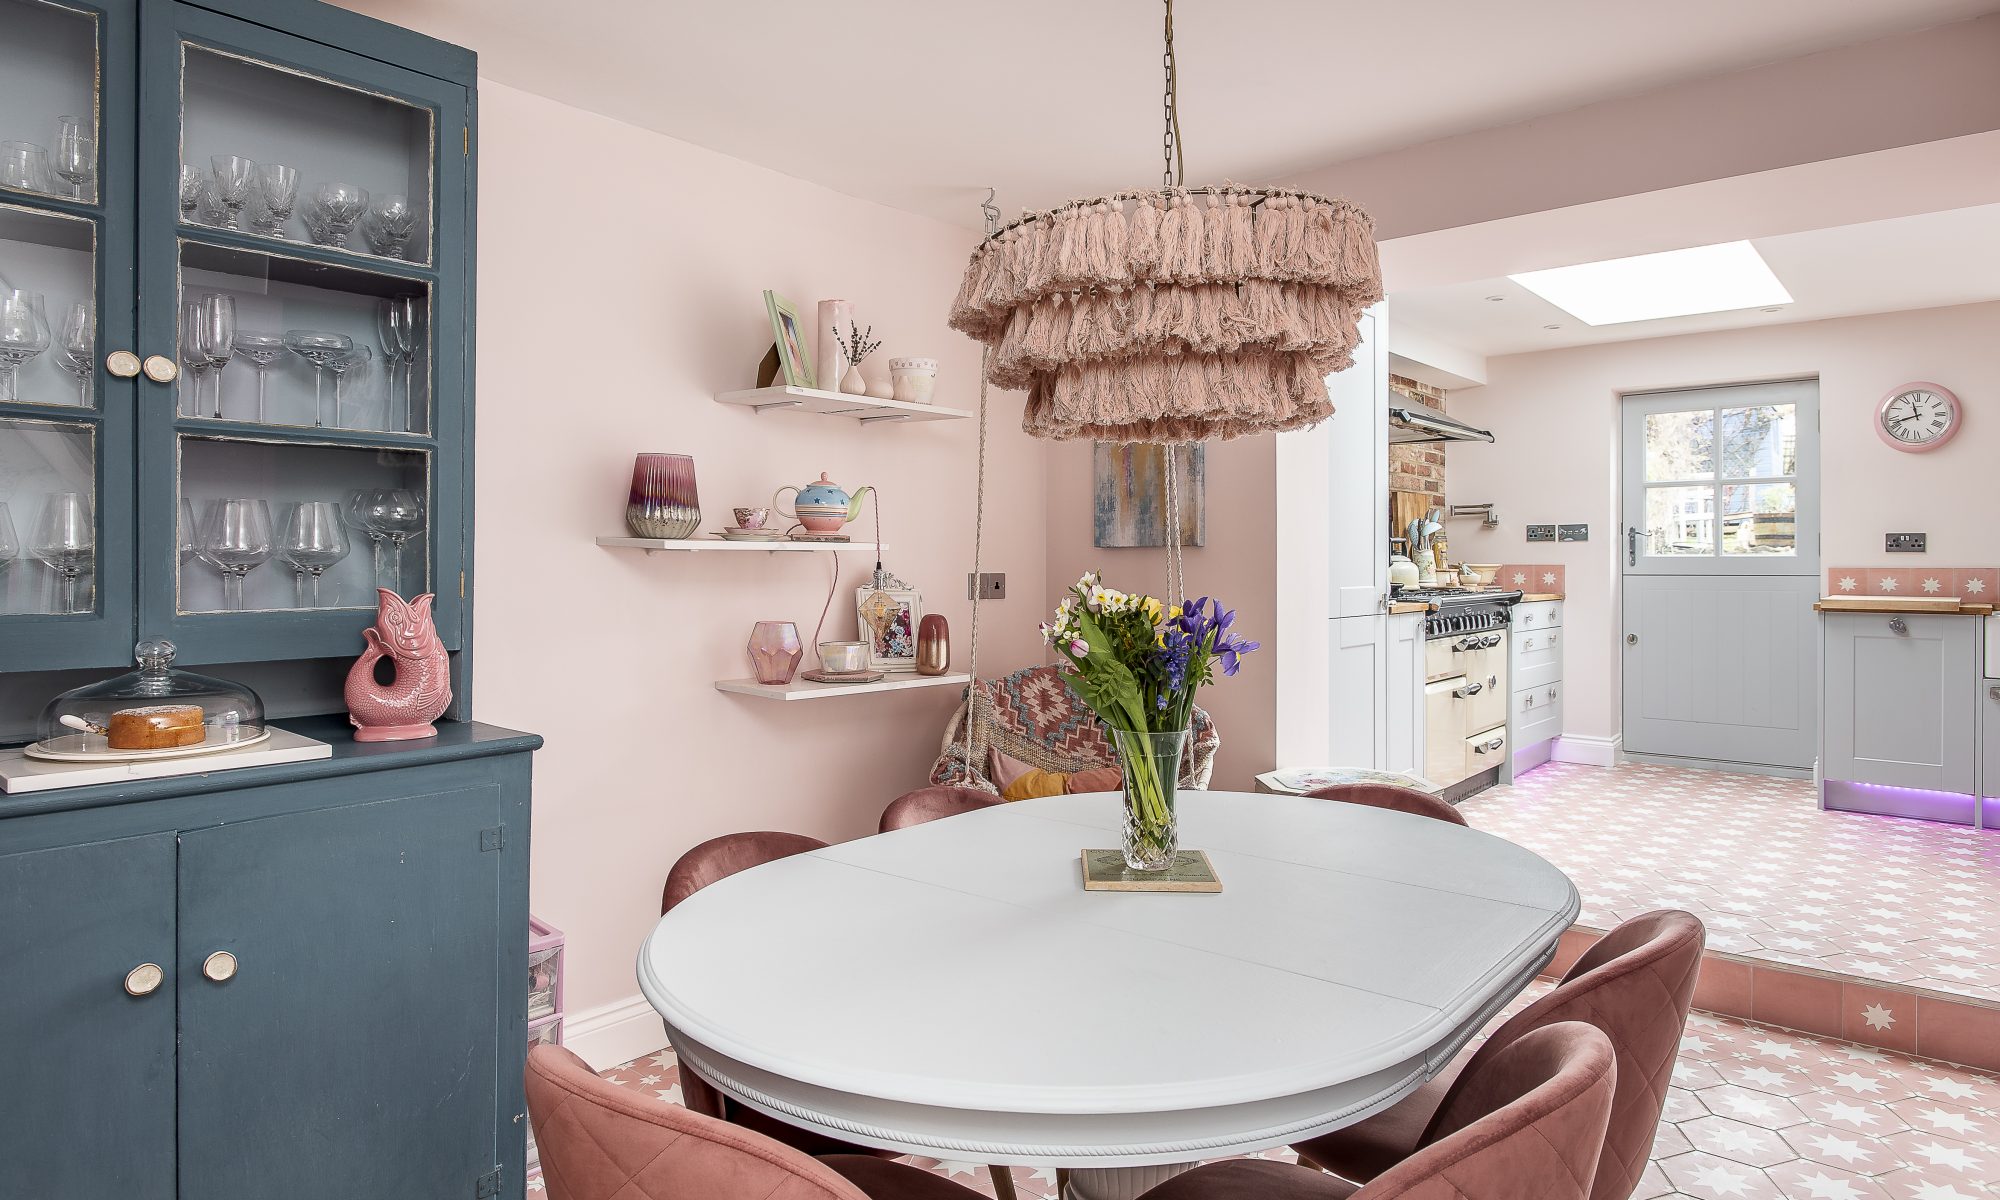 A huge pink lampshade by Anthropologie hovers over the dining table. The tiles on the walls in the kitchen, from Bert & May, miraculously match the floor tiles